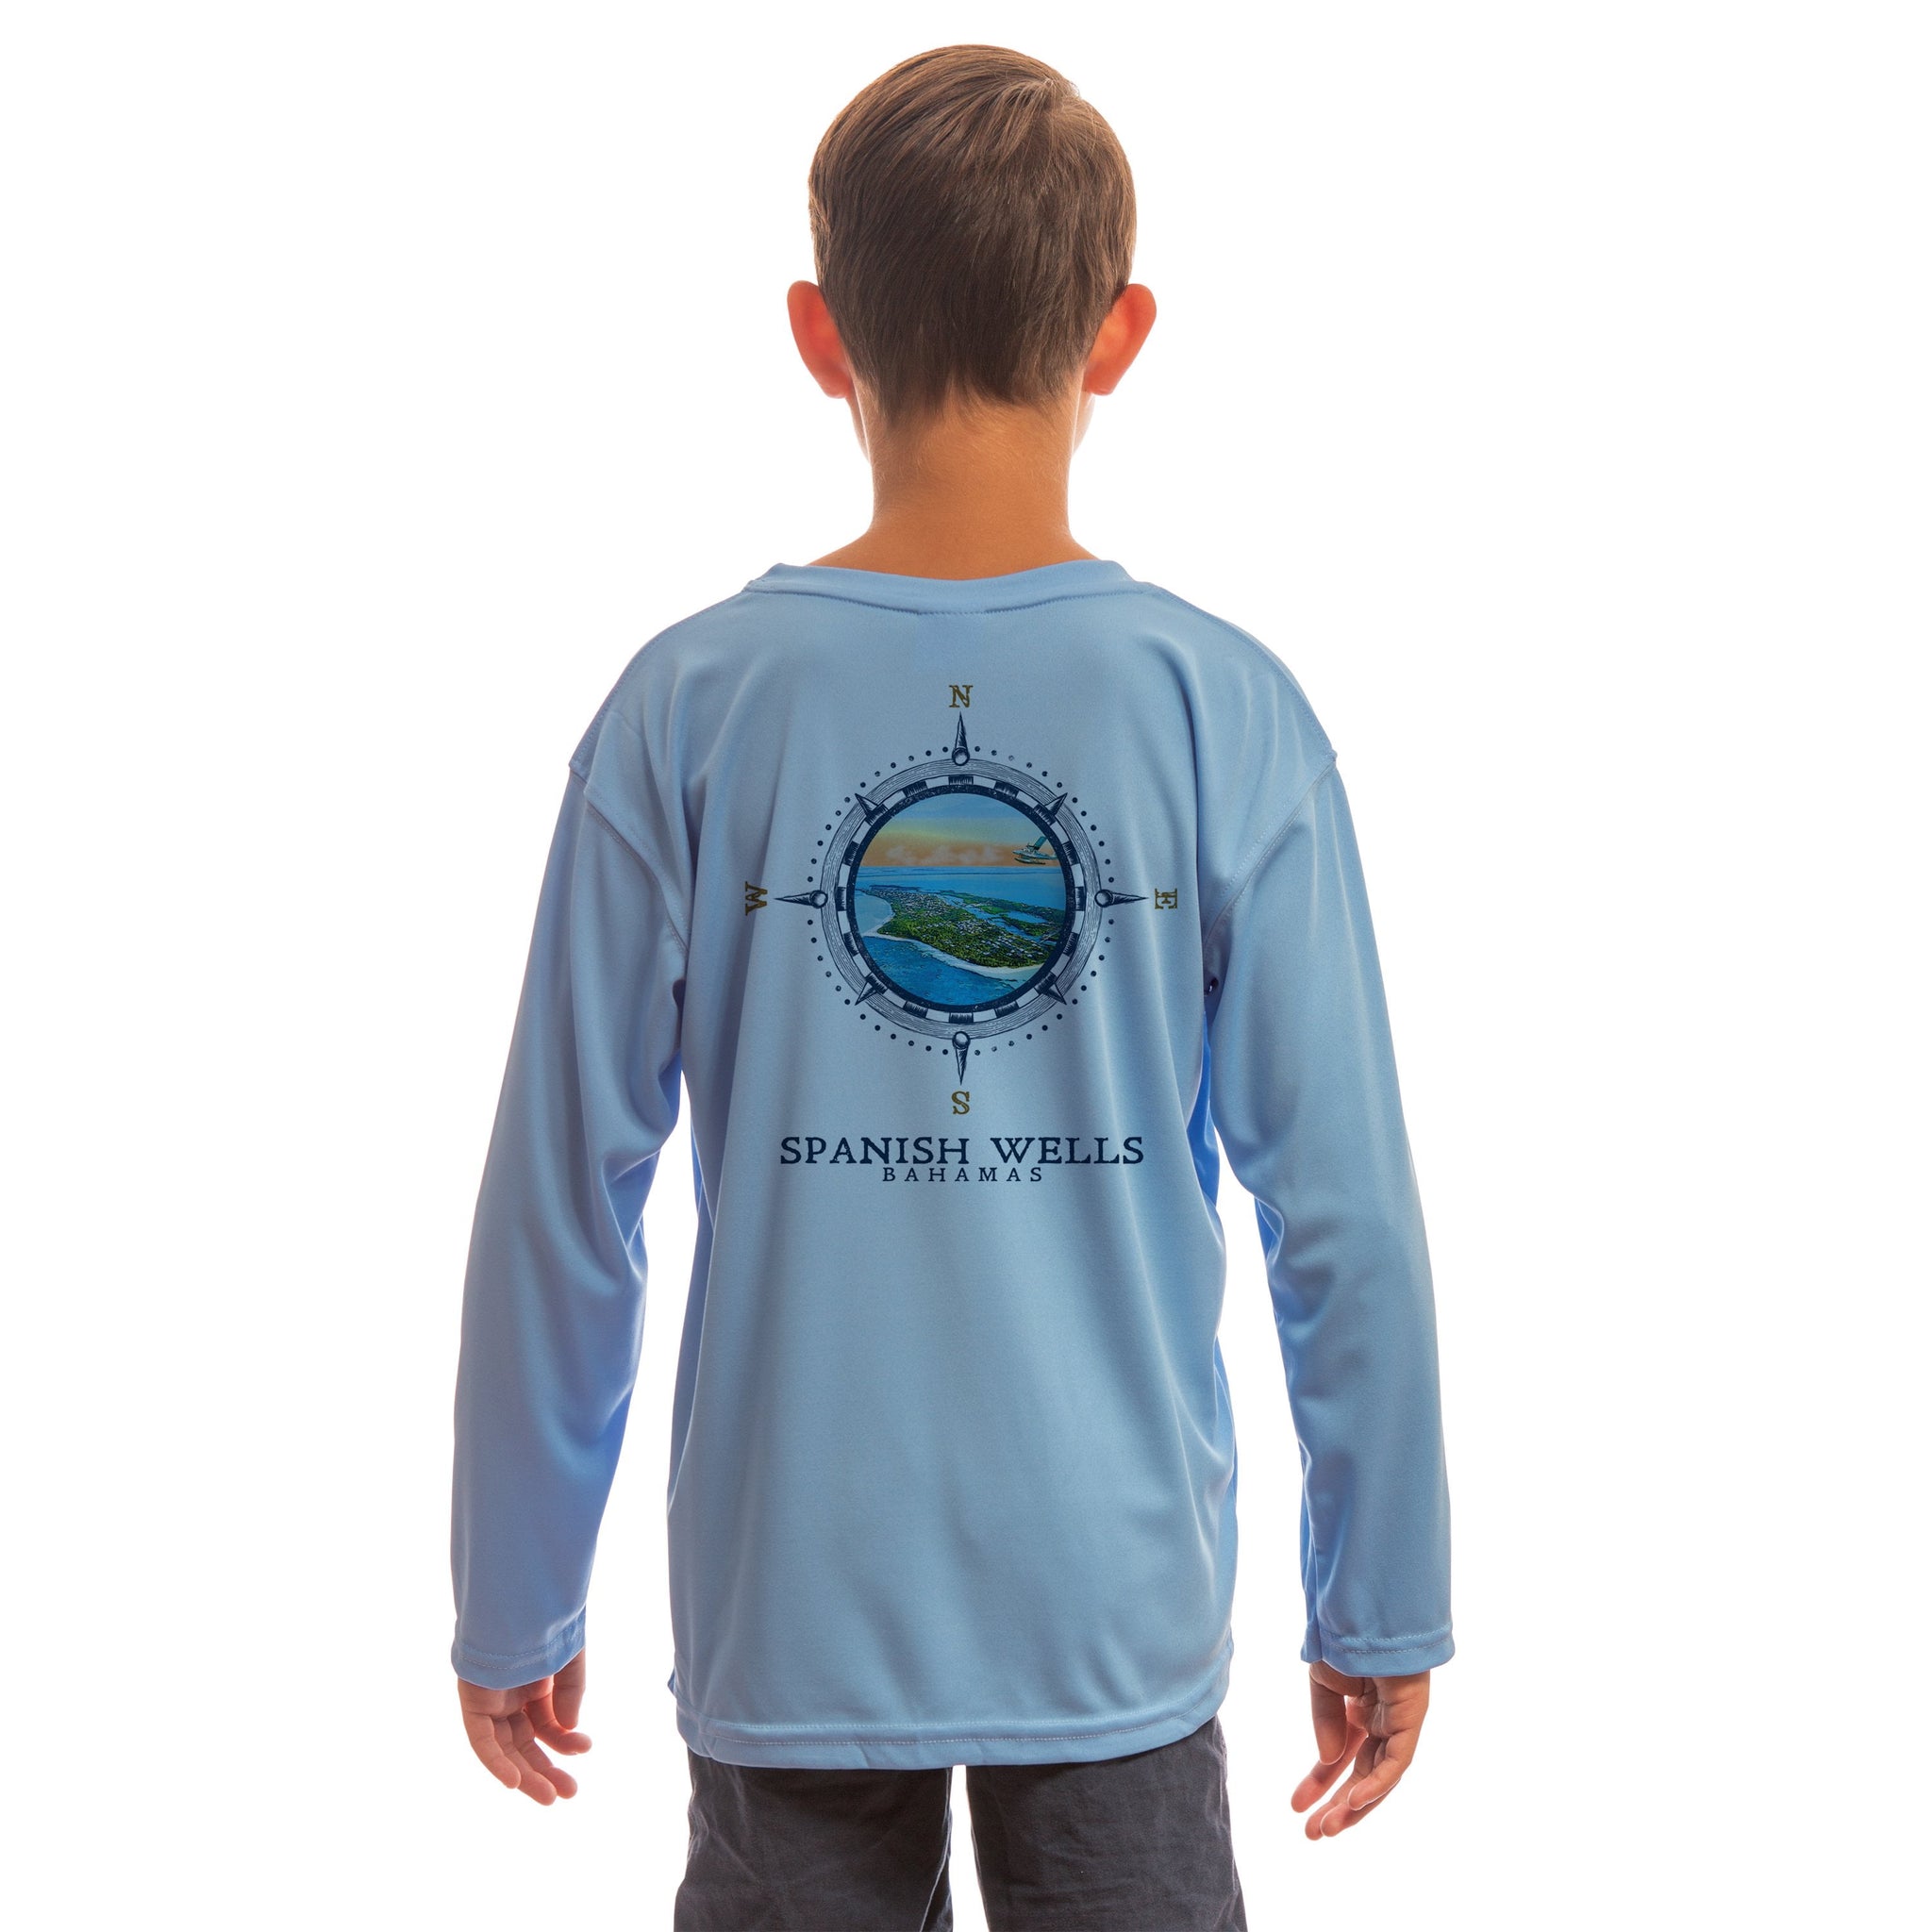 Compass Vintage Spanish Wells Youth UPF 50 Long Sleeve